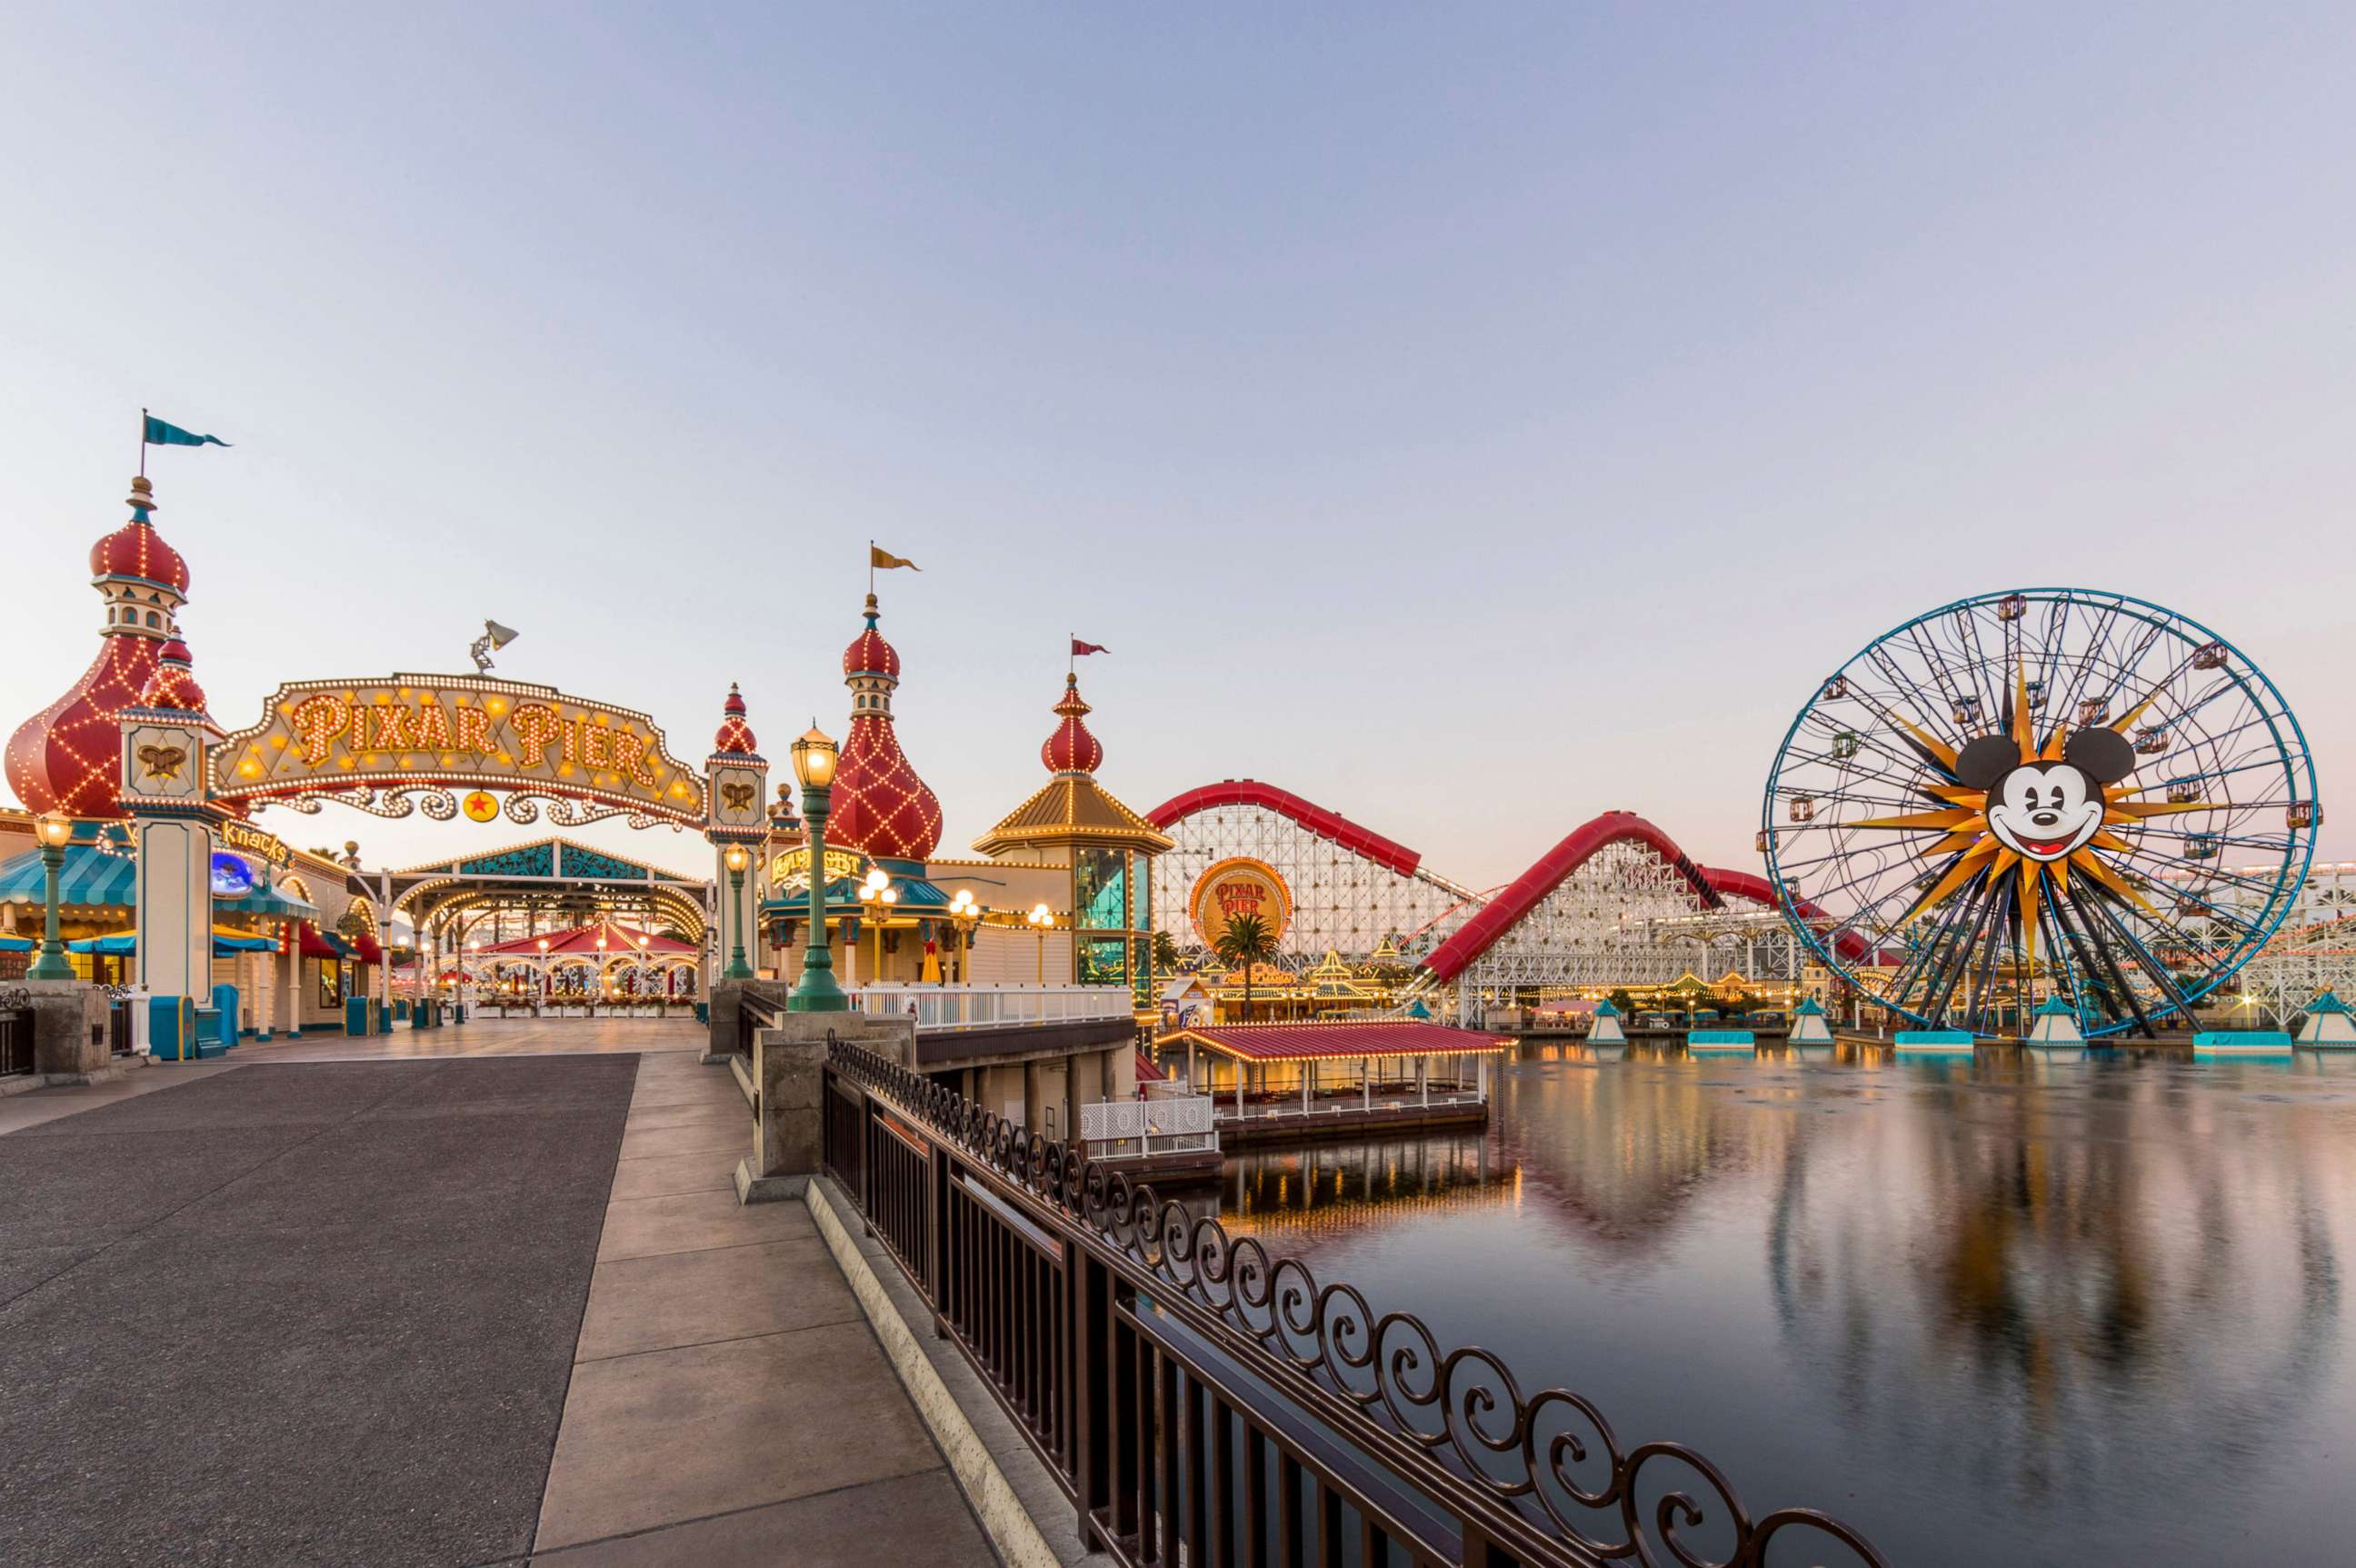 PHOTO: Disneyland Resort is introducing "A Touch of Disney," a limited-capacity ticketed experience at Disney California Adventure Park, beginning March 18, 2021.